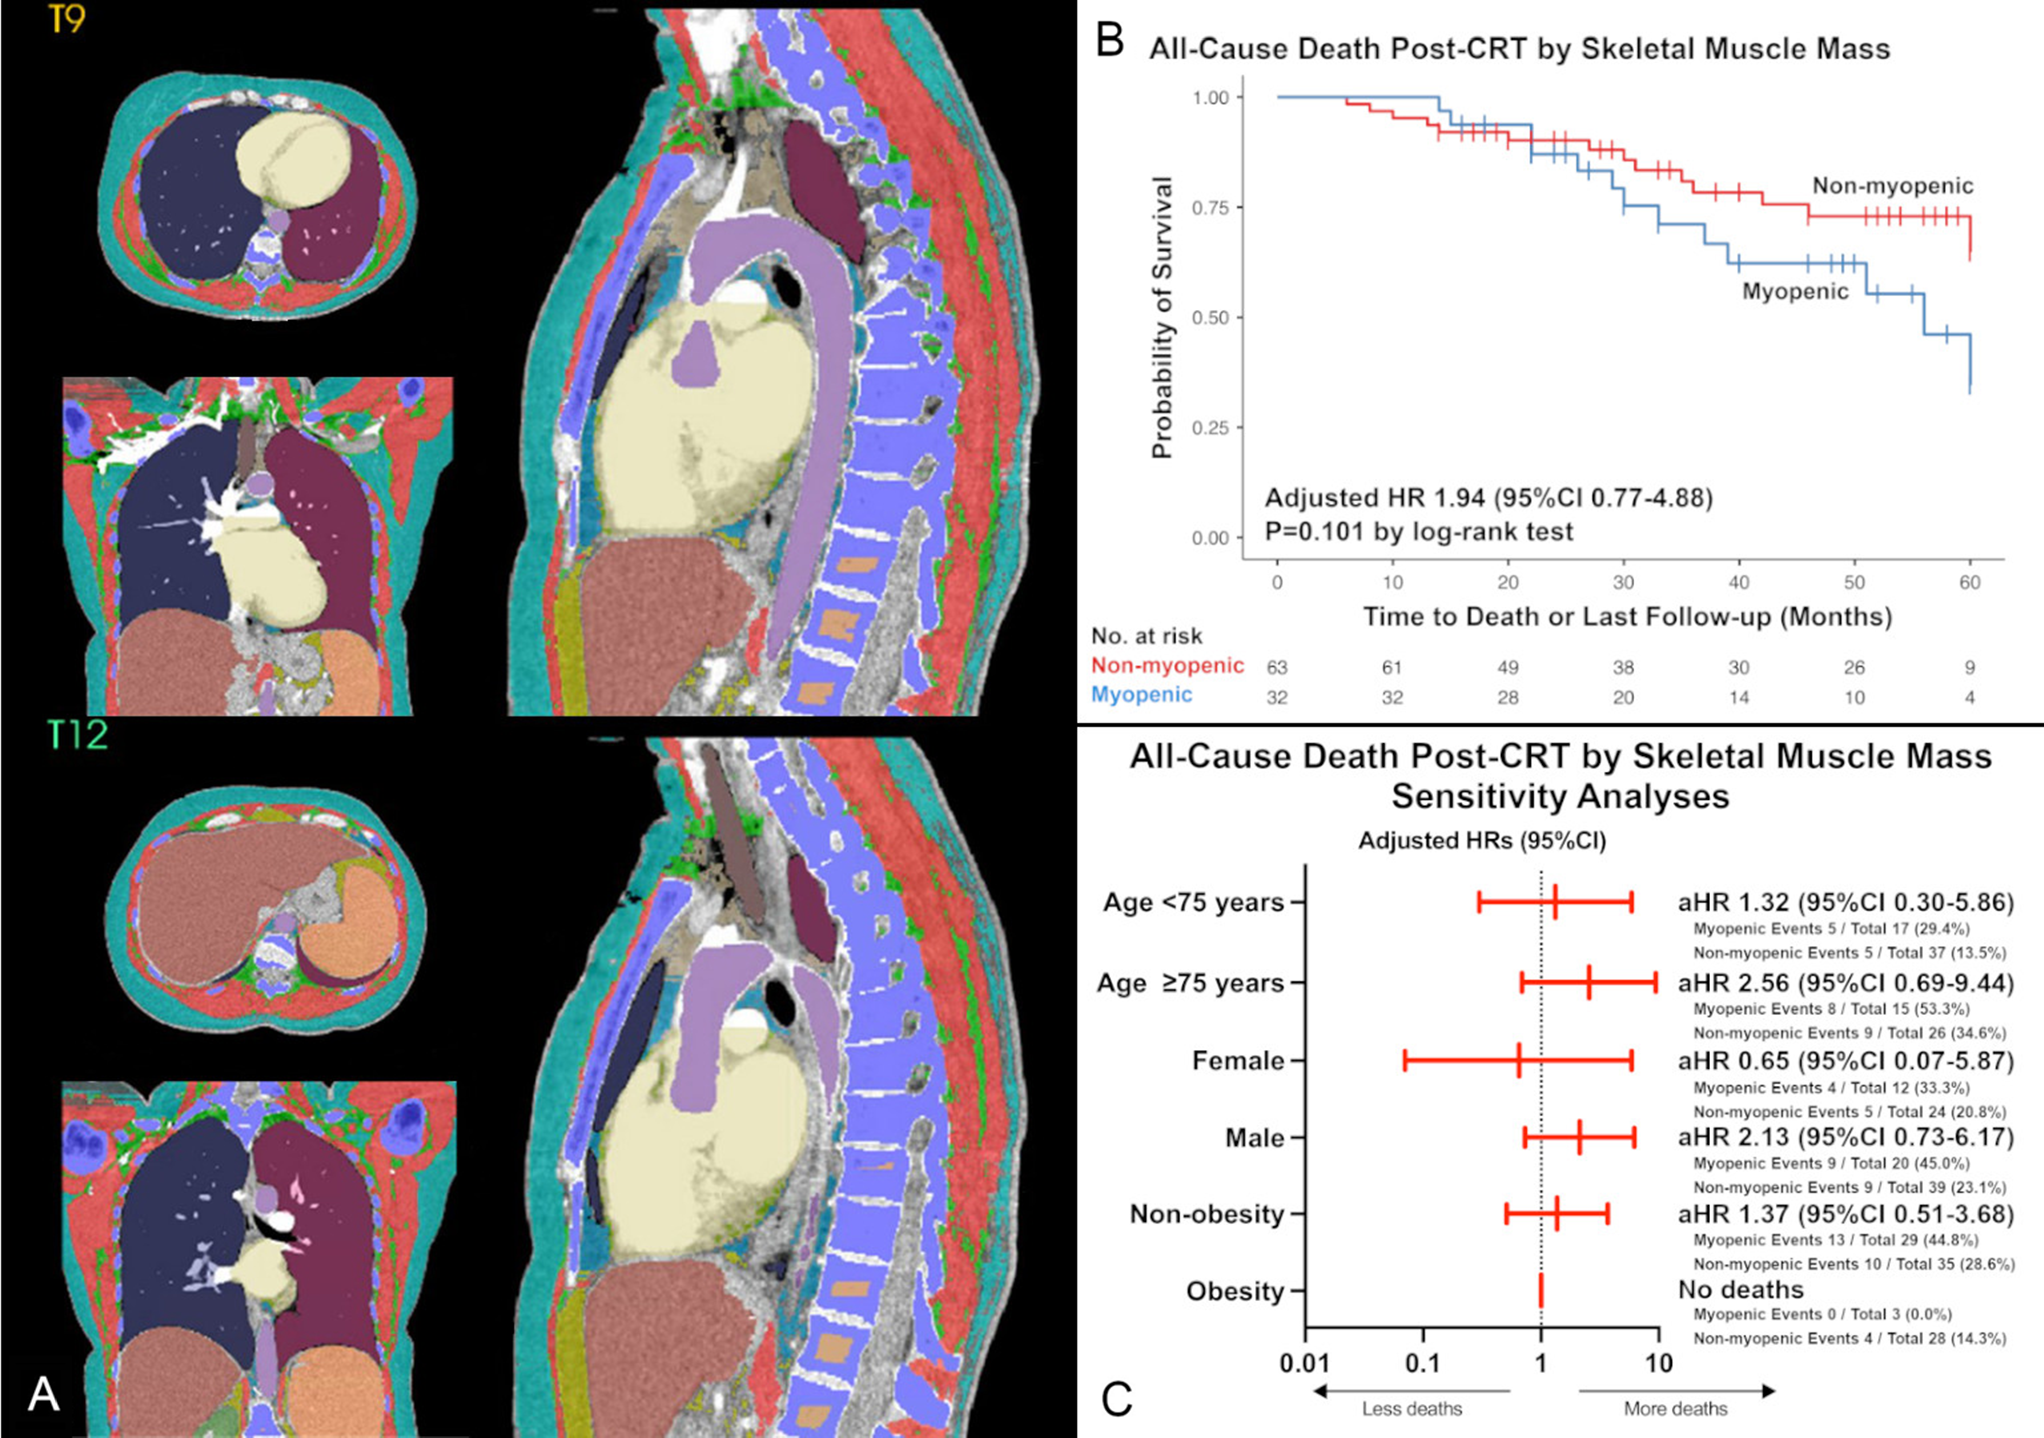 Preimplant myopenia and clinical outcomes among patients with heart failure undergoing cardiac resynchronization therapy